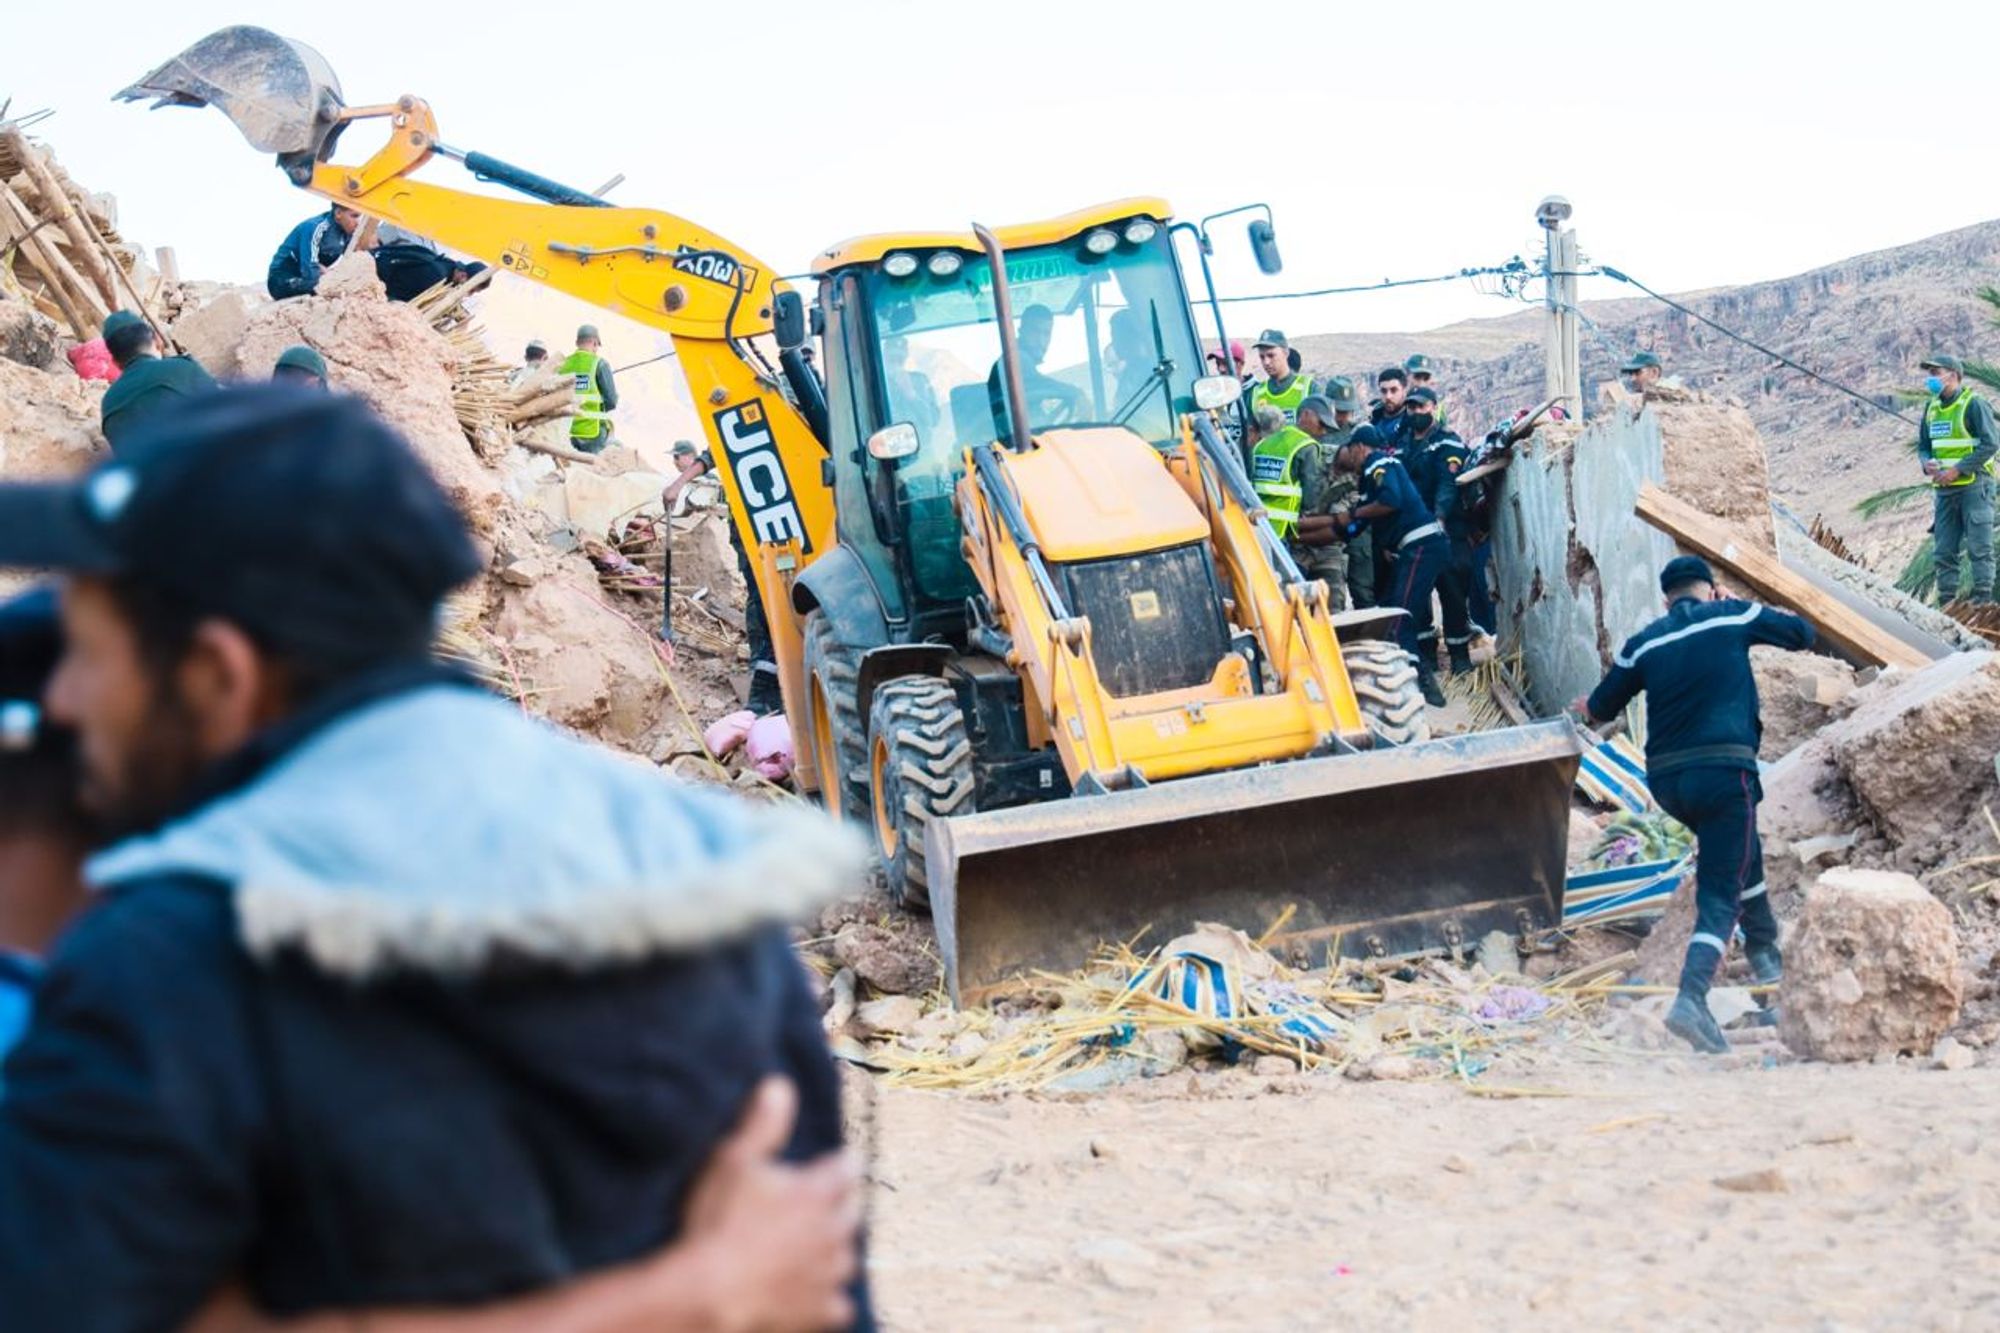 Rescue teams work to clear debris after the Morocco earthquake.